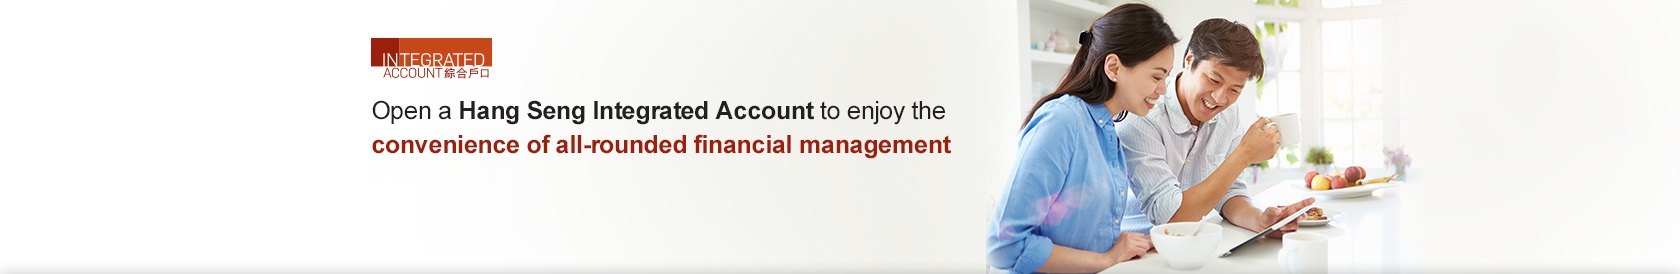 Integrated Account  open a Hang Seng Integrated Account to enjoy the convenience of all-rounded financial management